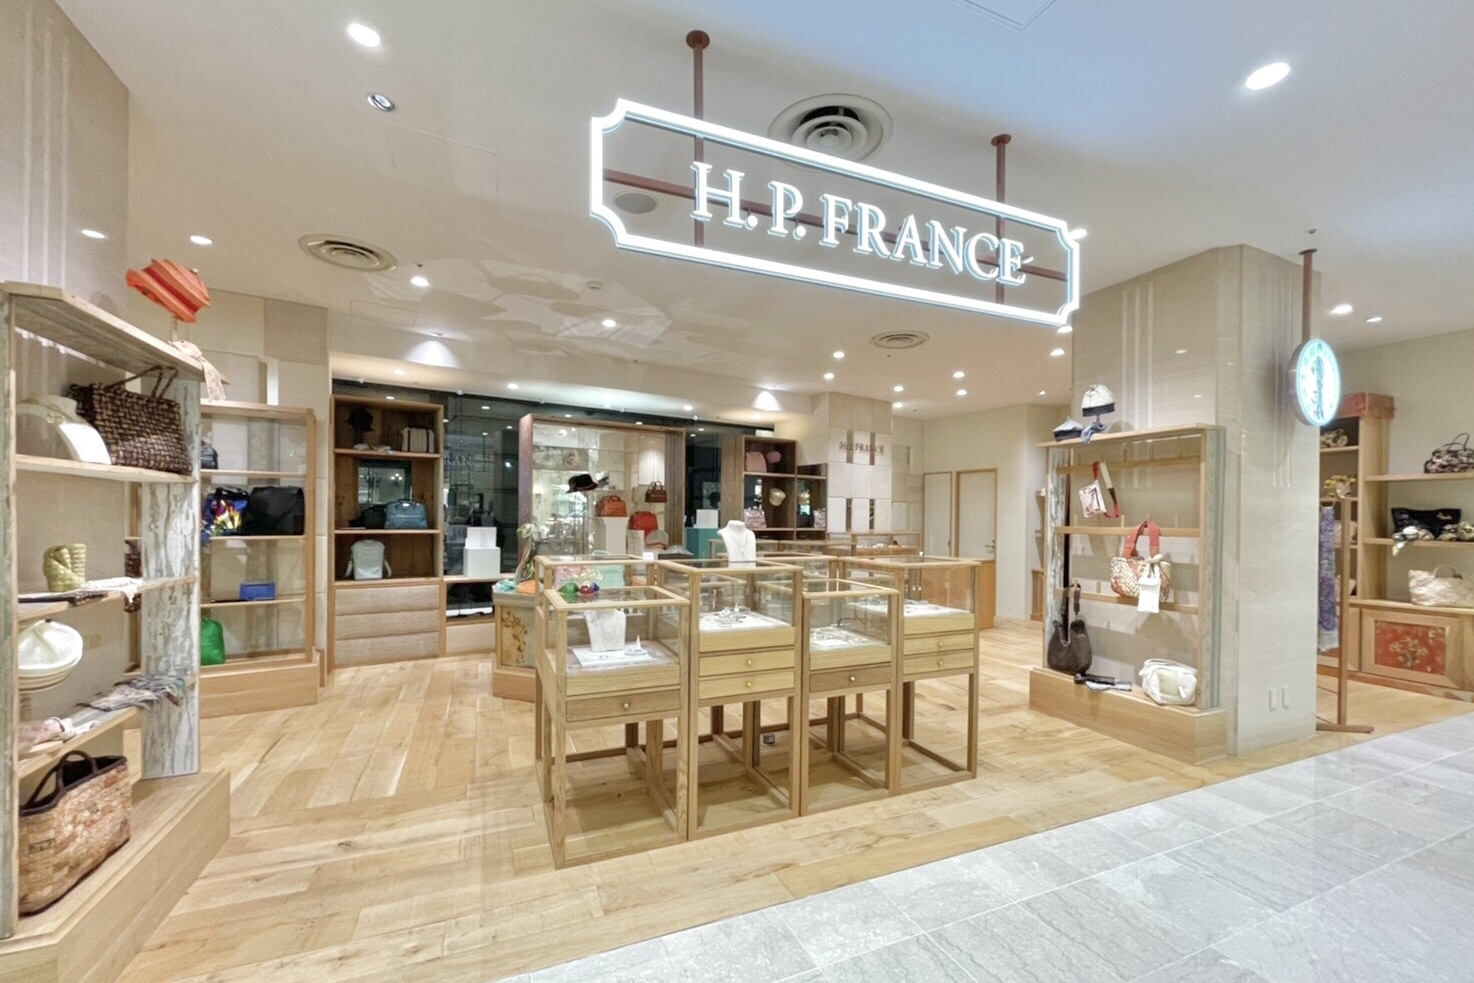 H.P.FRANCE（florian / ネックレス）